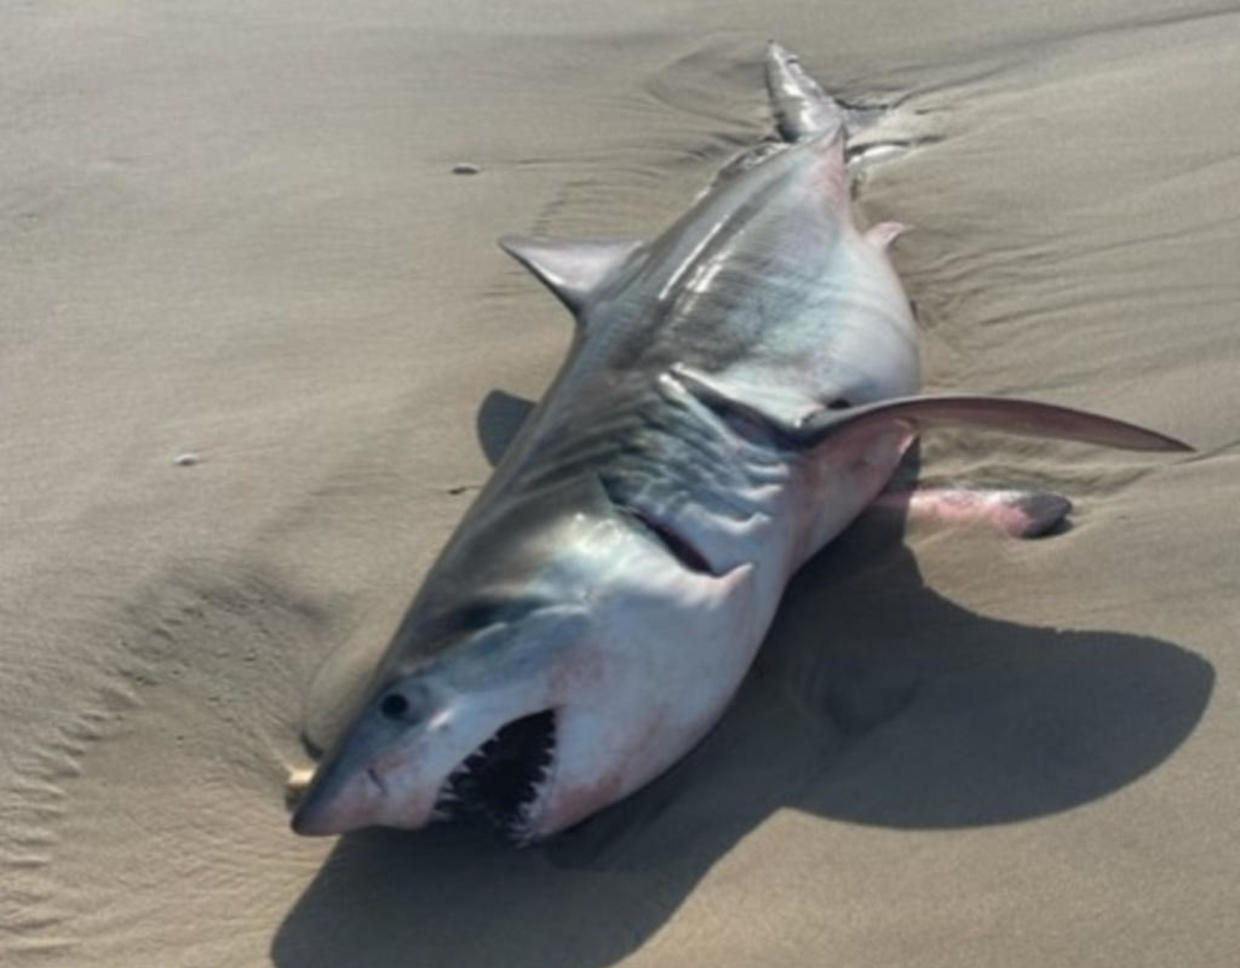 Dead juvenile great white shark washes up on beach in Quogue CBS New York